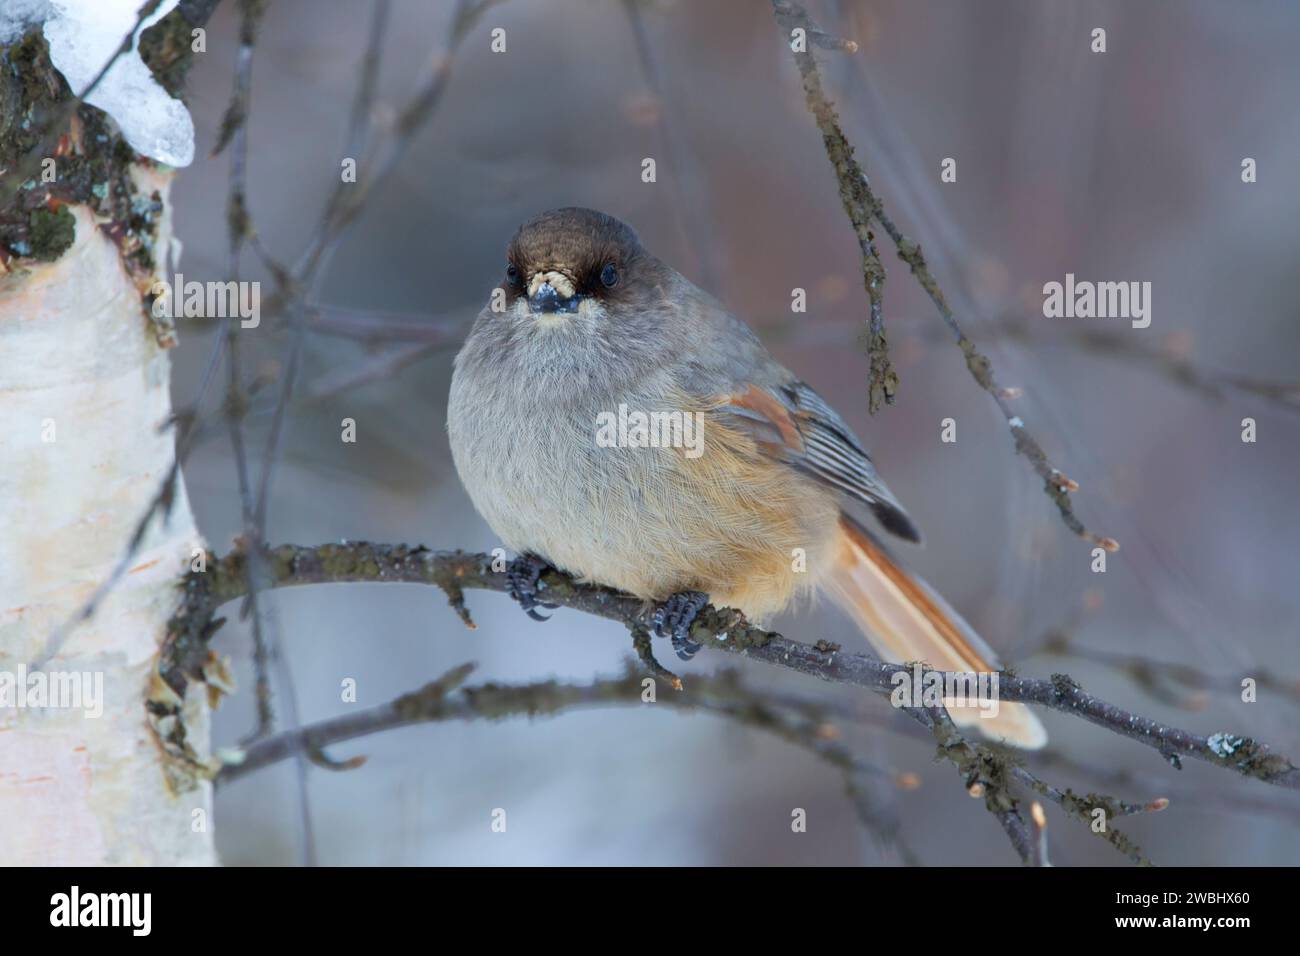 Siberian Jay (Perisoreus infaustus), perched on a thin branch showing details of front plumage in soft light against out of focus trees in boreal fore Stock Photo